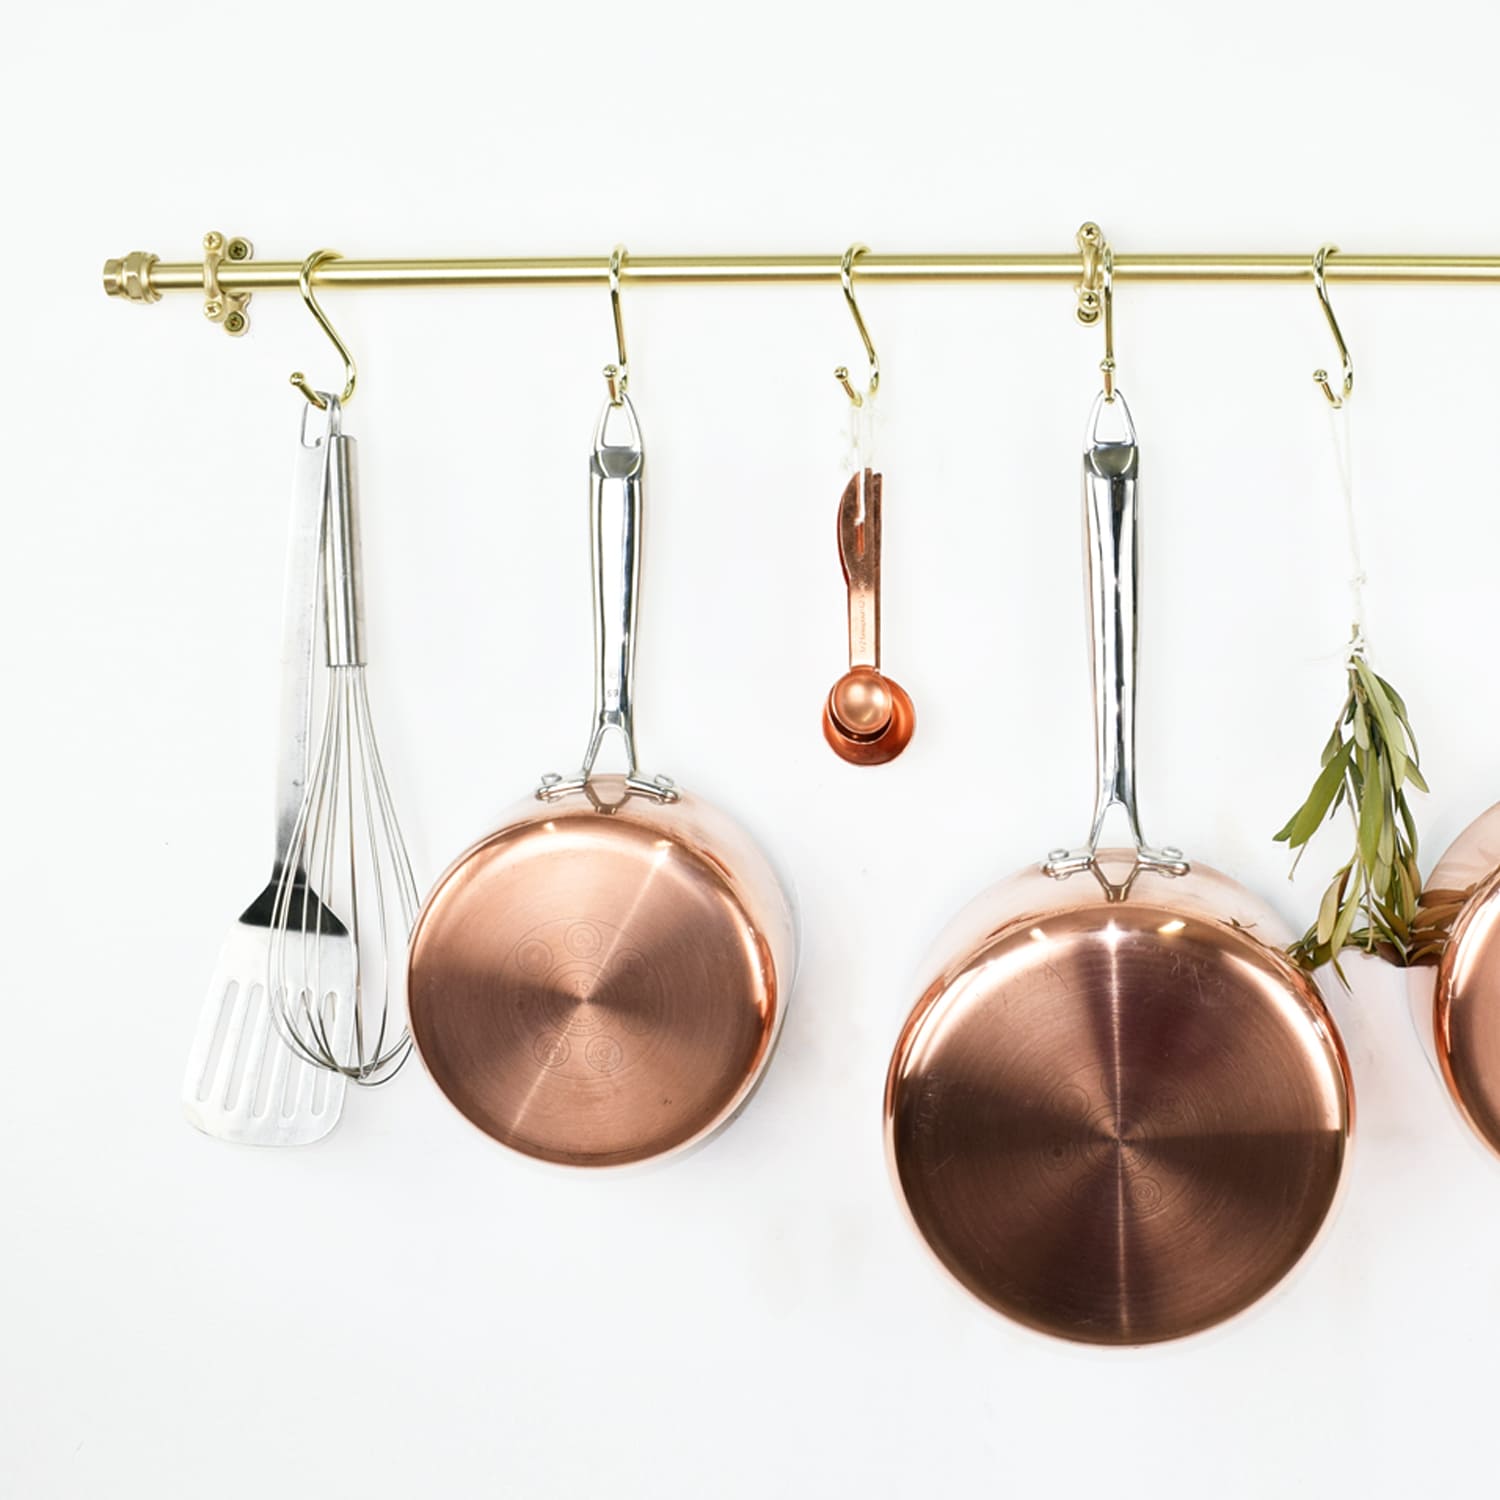 Wall Mounted Solid Brass Pan Rail - 15mm - With hanging pots and pans